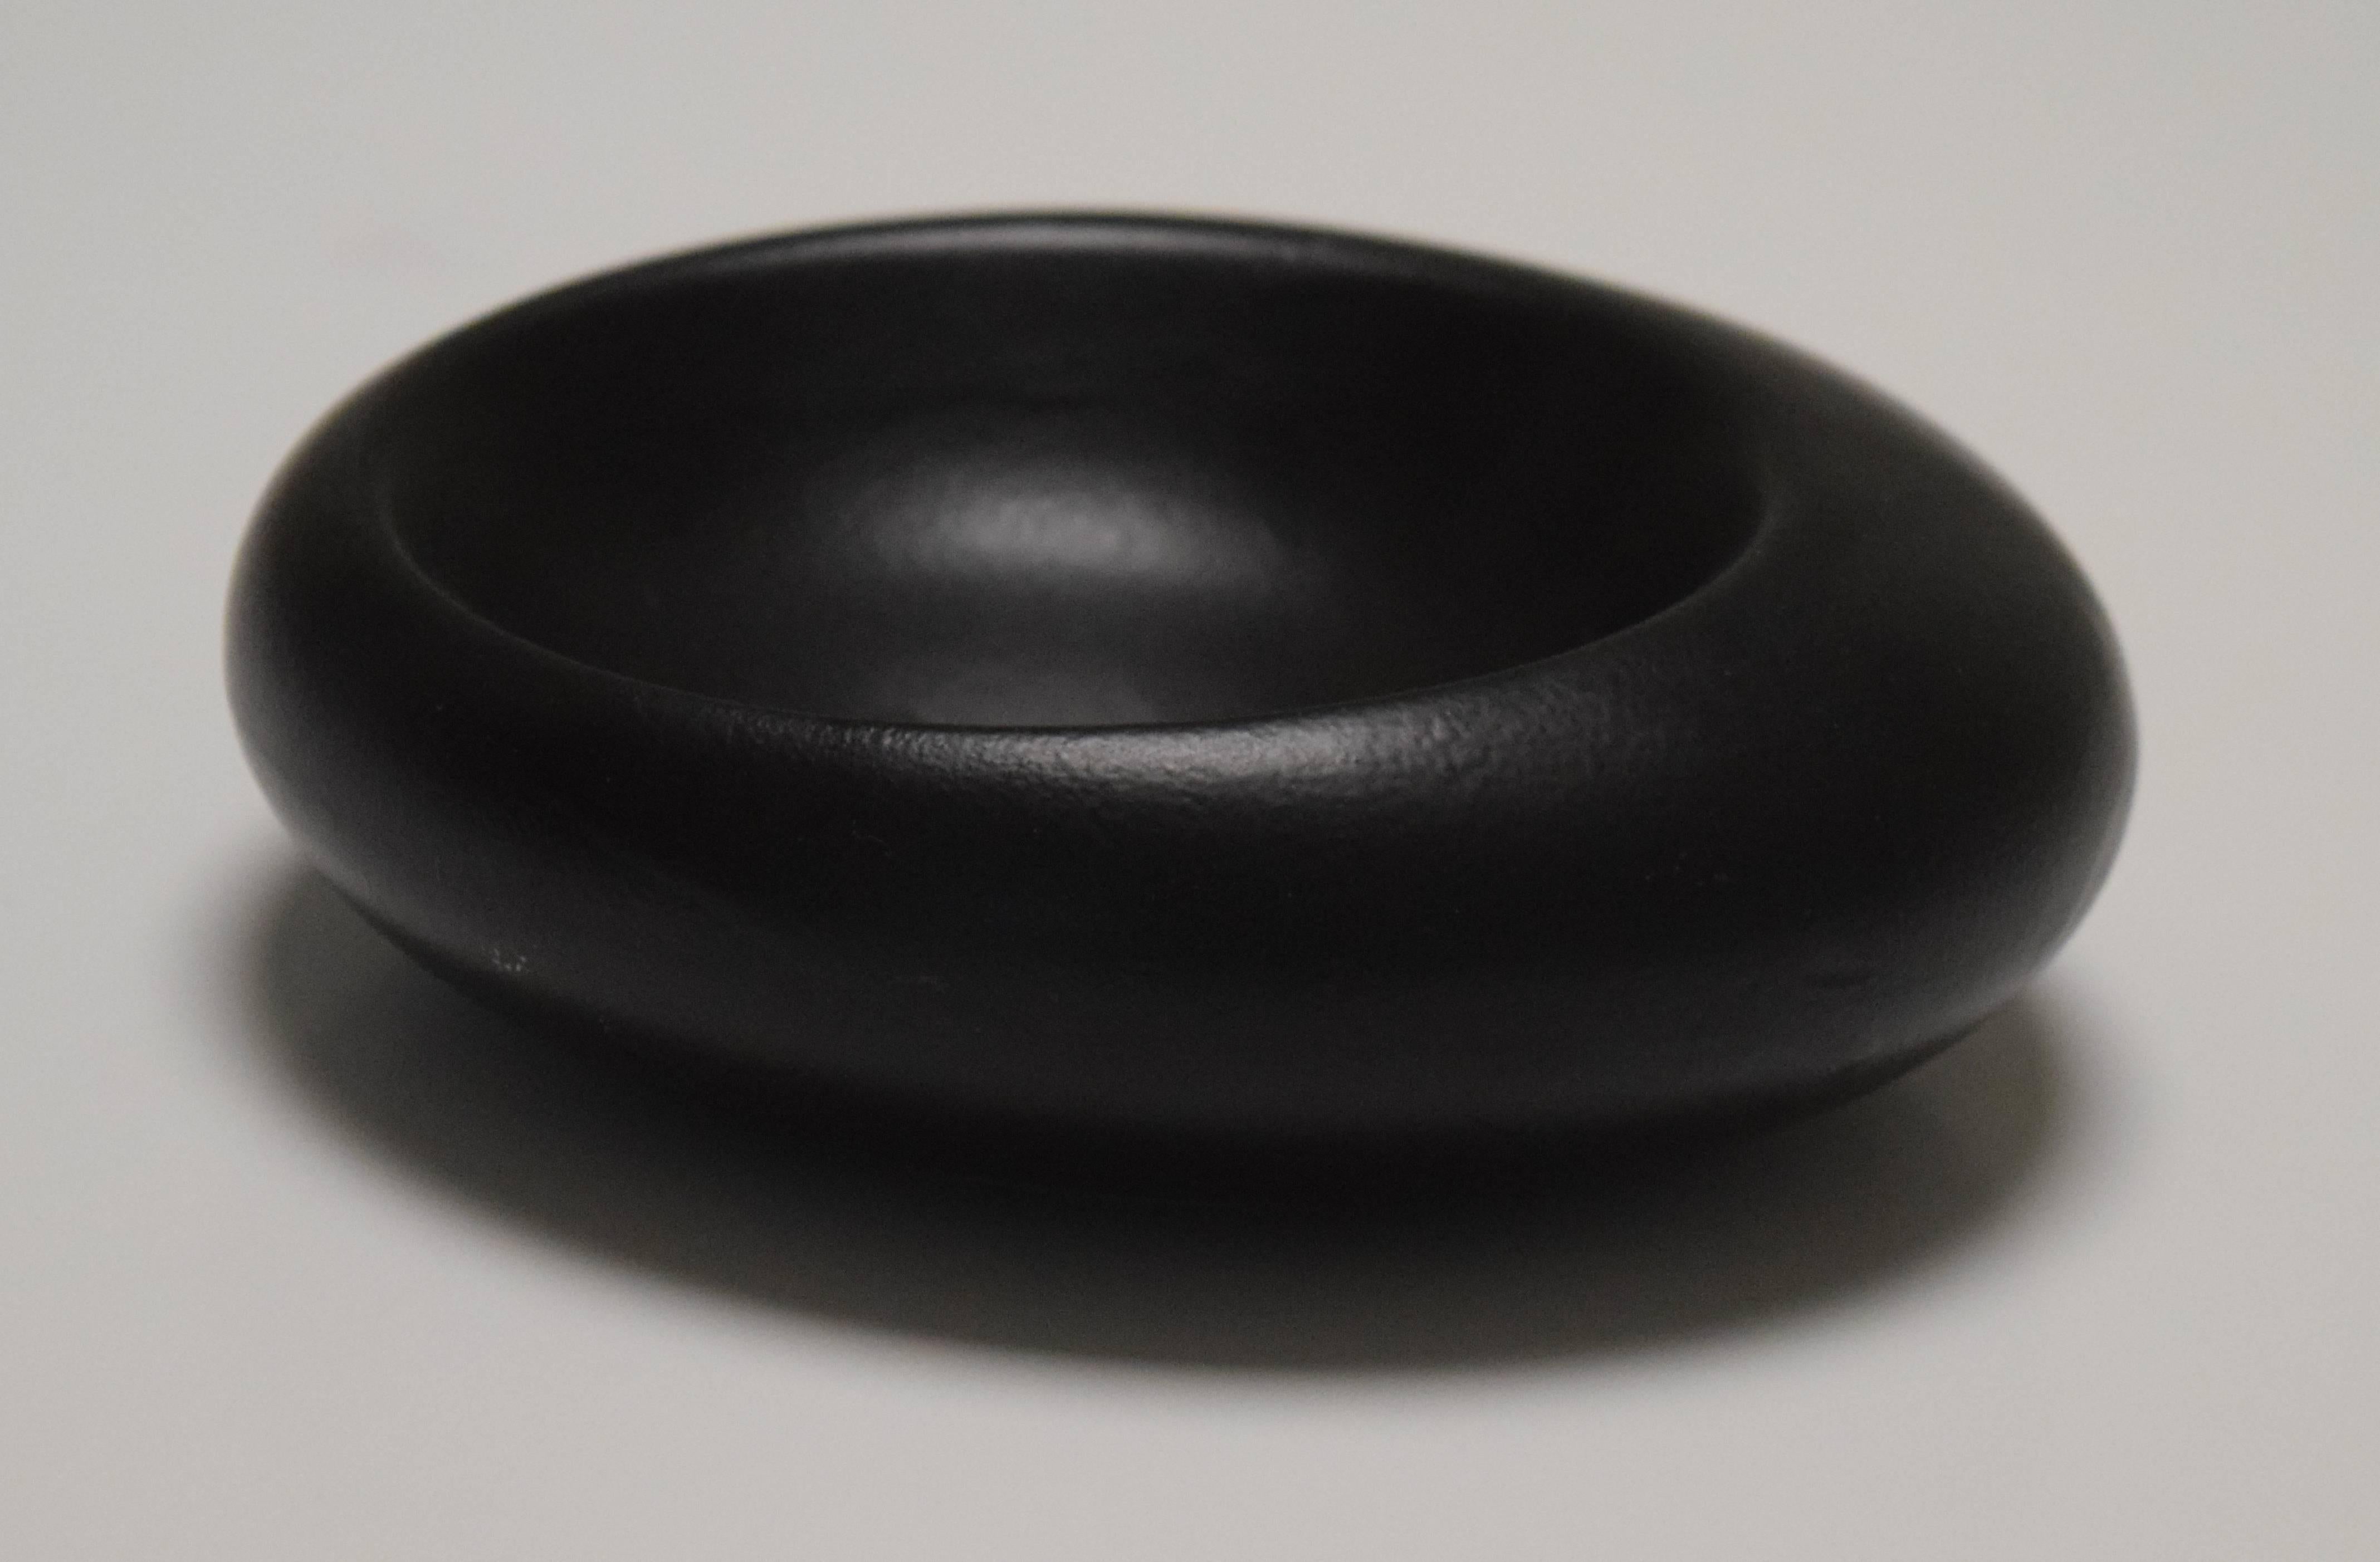 Store closing-- last day is 7/31. Offers welcome! Black ceramic bowl attributed to Bitossi, circa 1960s. Signed 305 Italy.